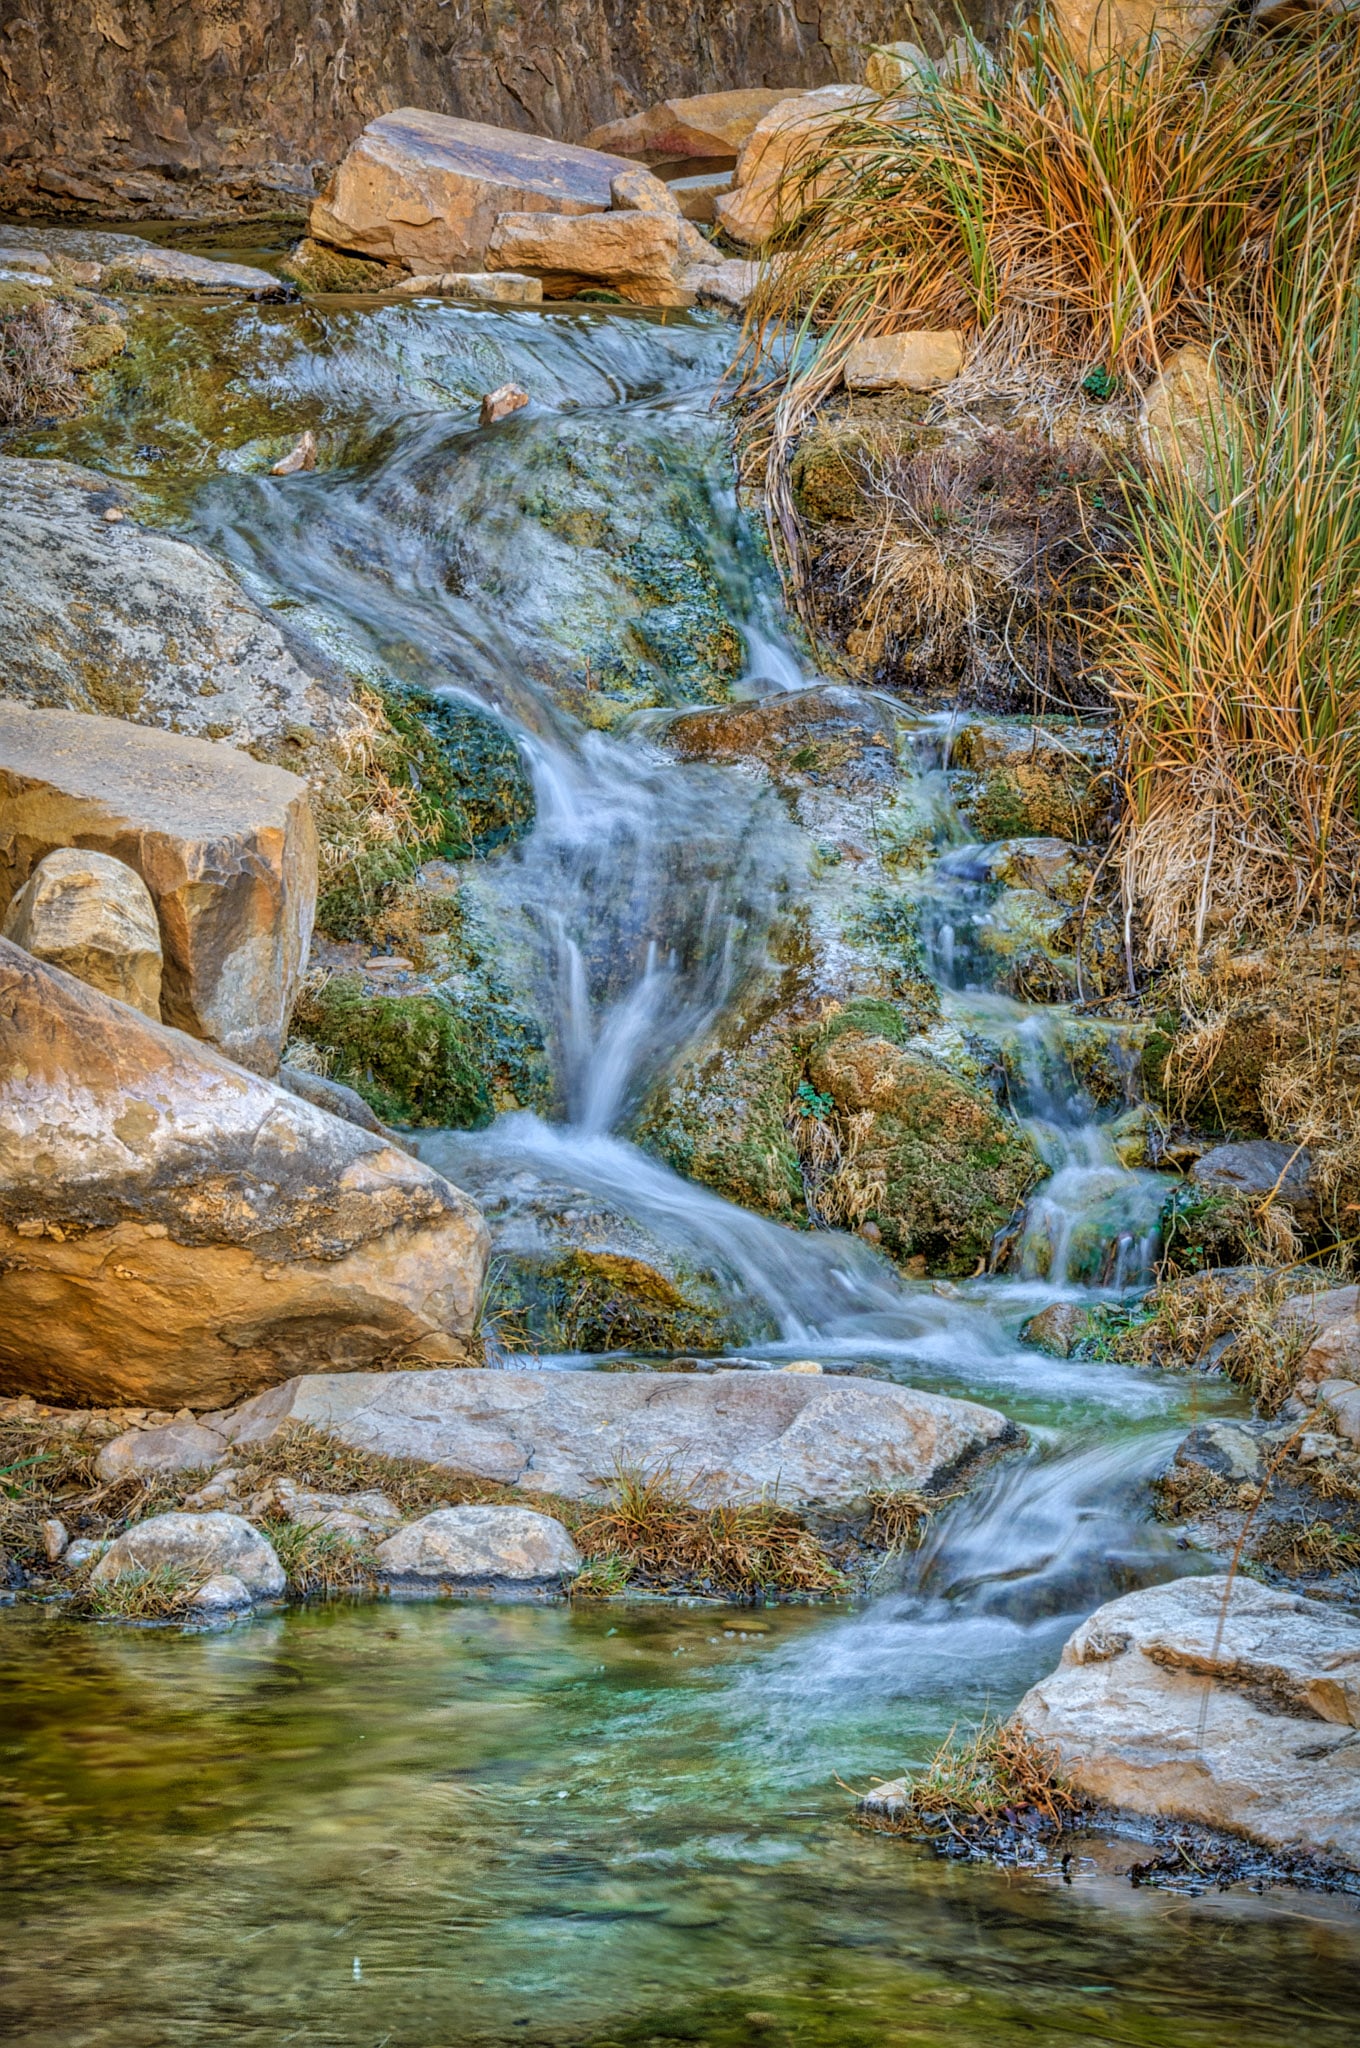 A small cascade babbles over rock below Sitting Bull Falls in Sitting Bull Falls Recreation Area near Carlsbad, New Mexico.